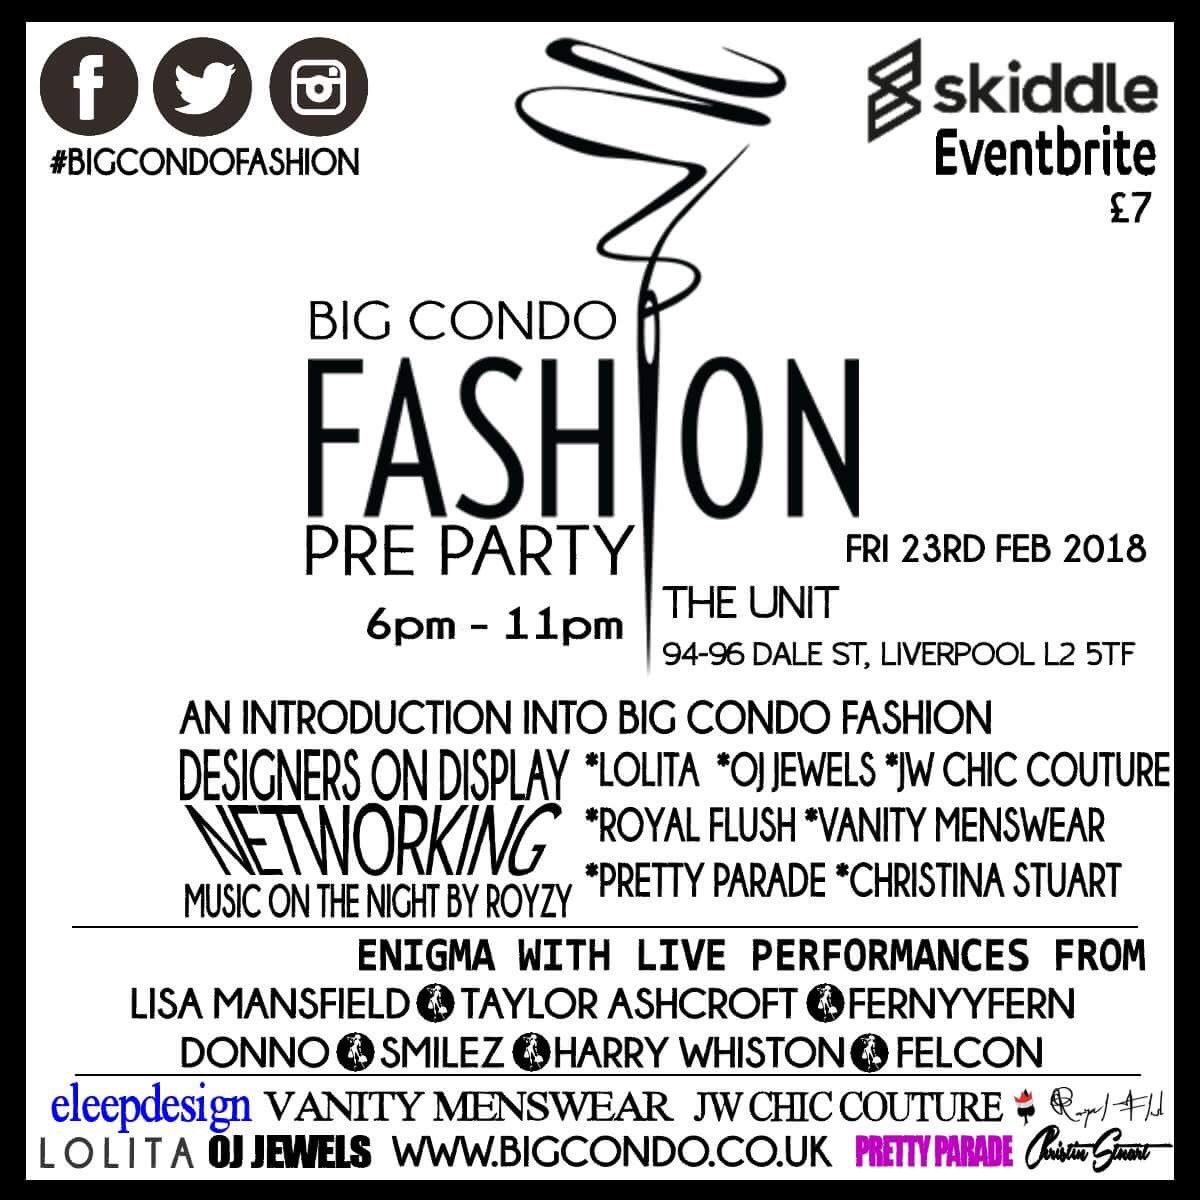 We the Big condo pre party on 23rd February tickets on sale now @EventbriteUK @skiddle #music #fashion #ClothingBrand #tickets #designer #PARTYALLNIGHT #DanceParty